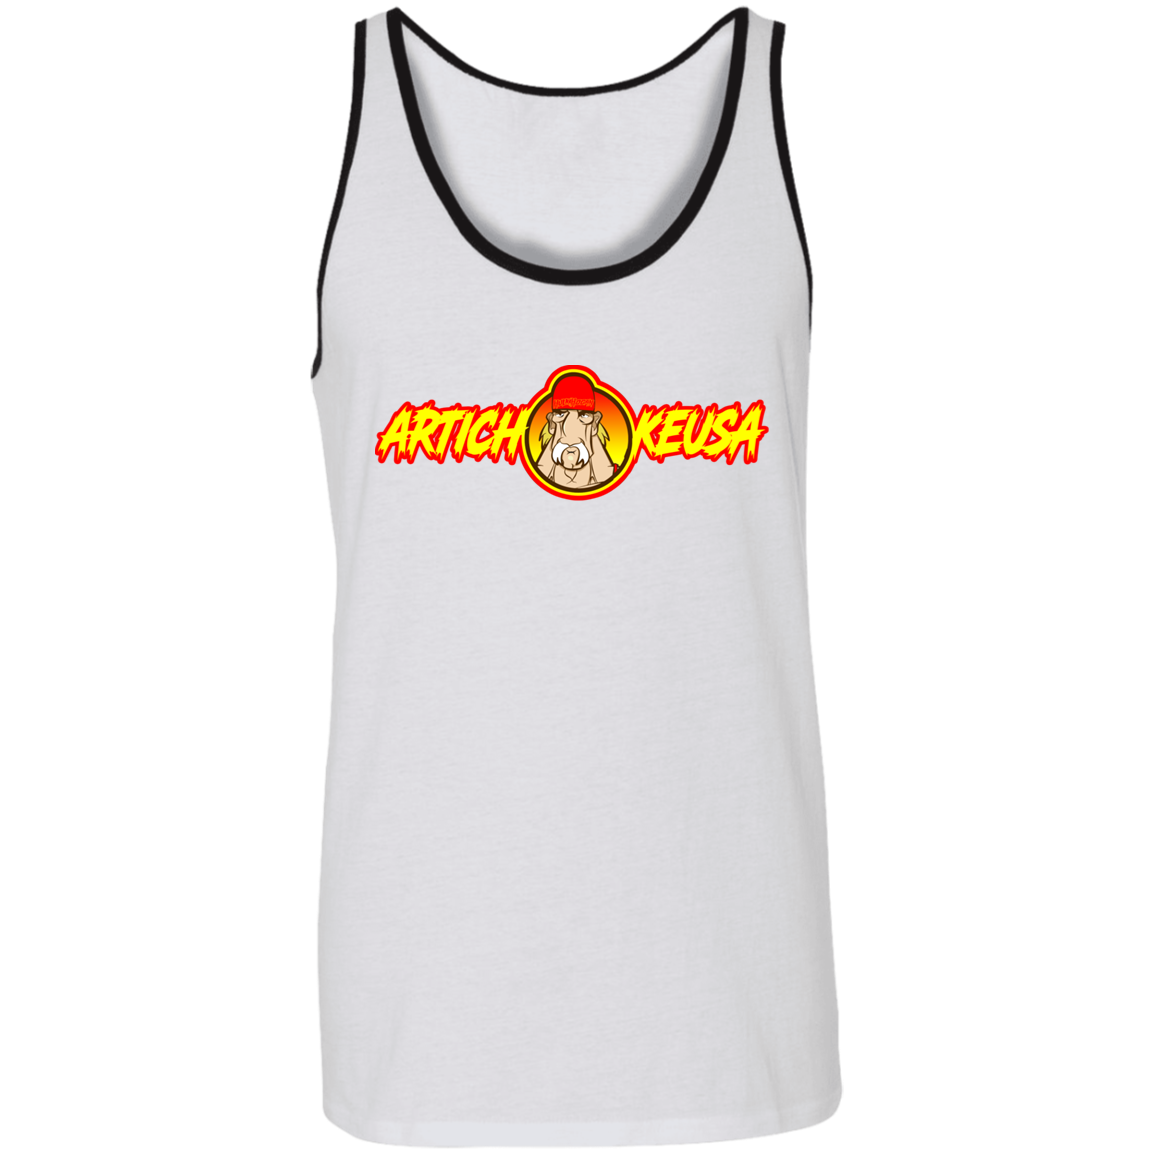 ArtichokeUSA Character and Font Design. Let’s Create Your Own Design Today. Fan Art. The Hulkster. Unisex Tank